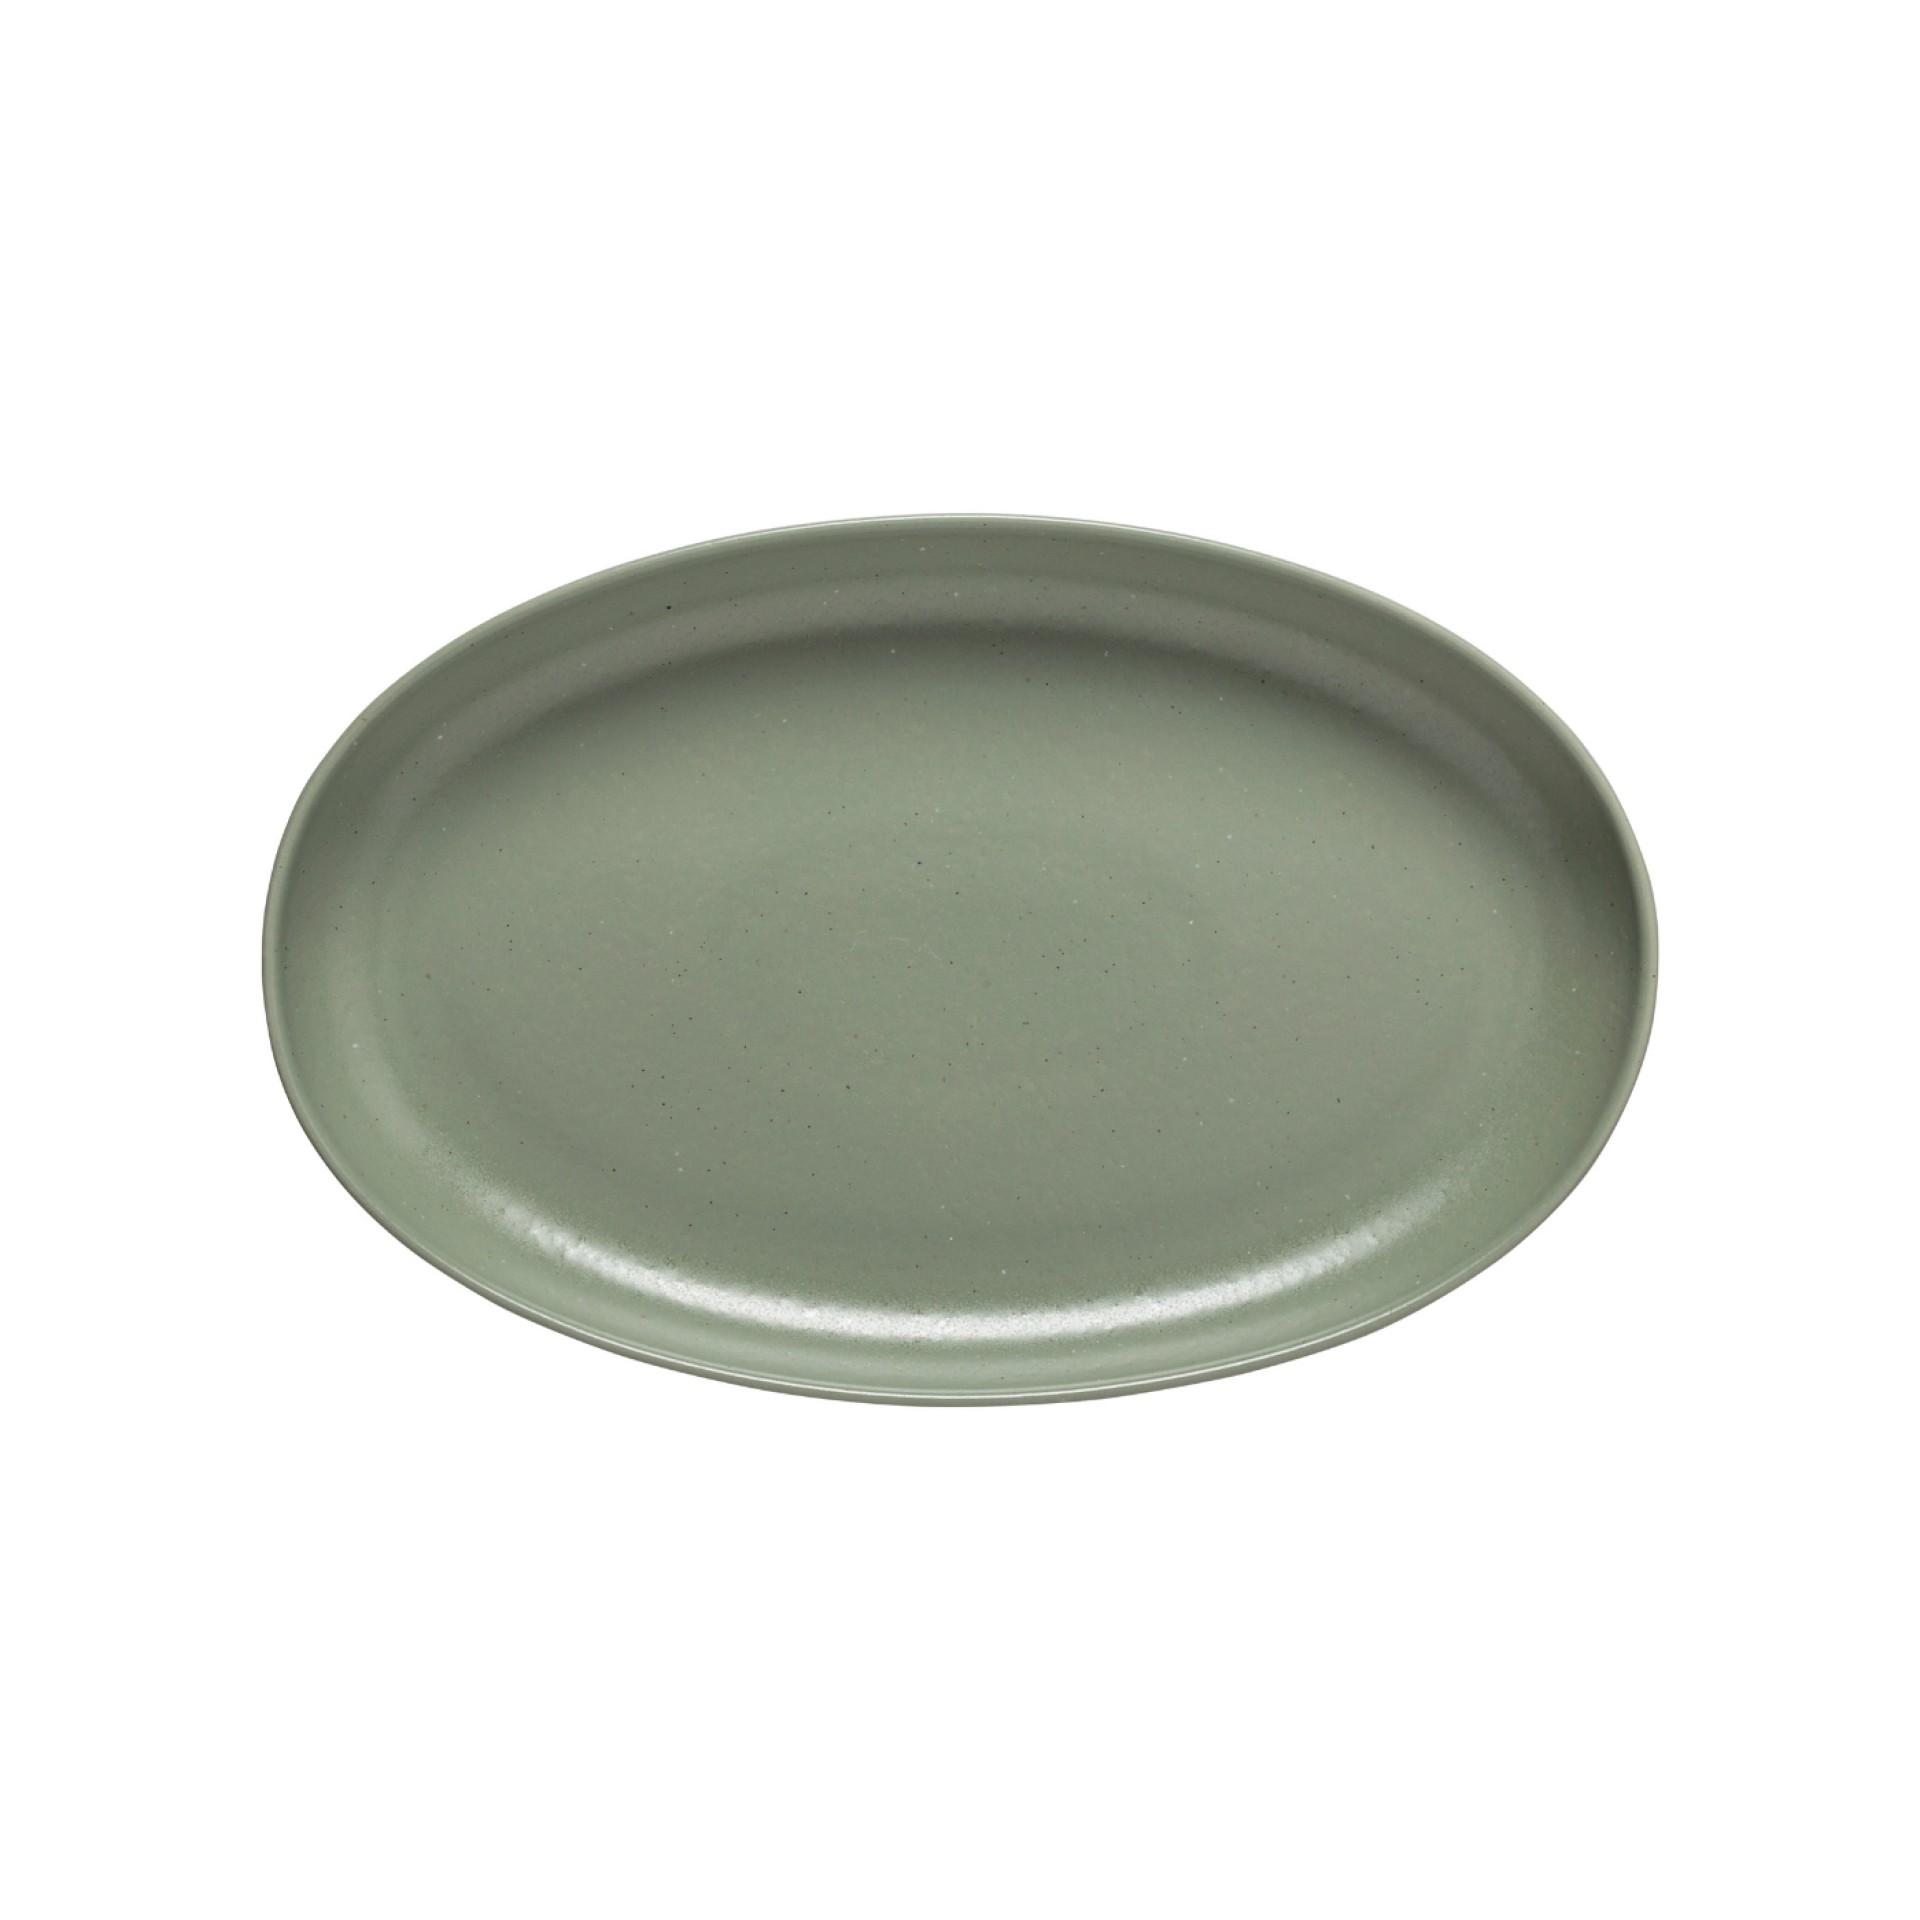 Oval Platter Pacifica by Casafina